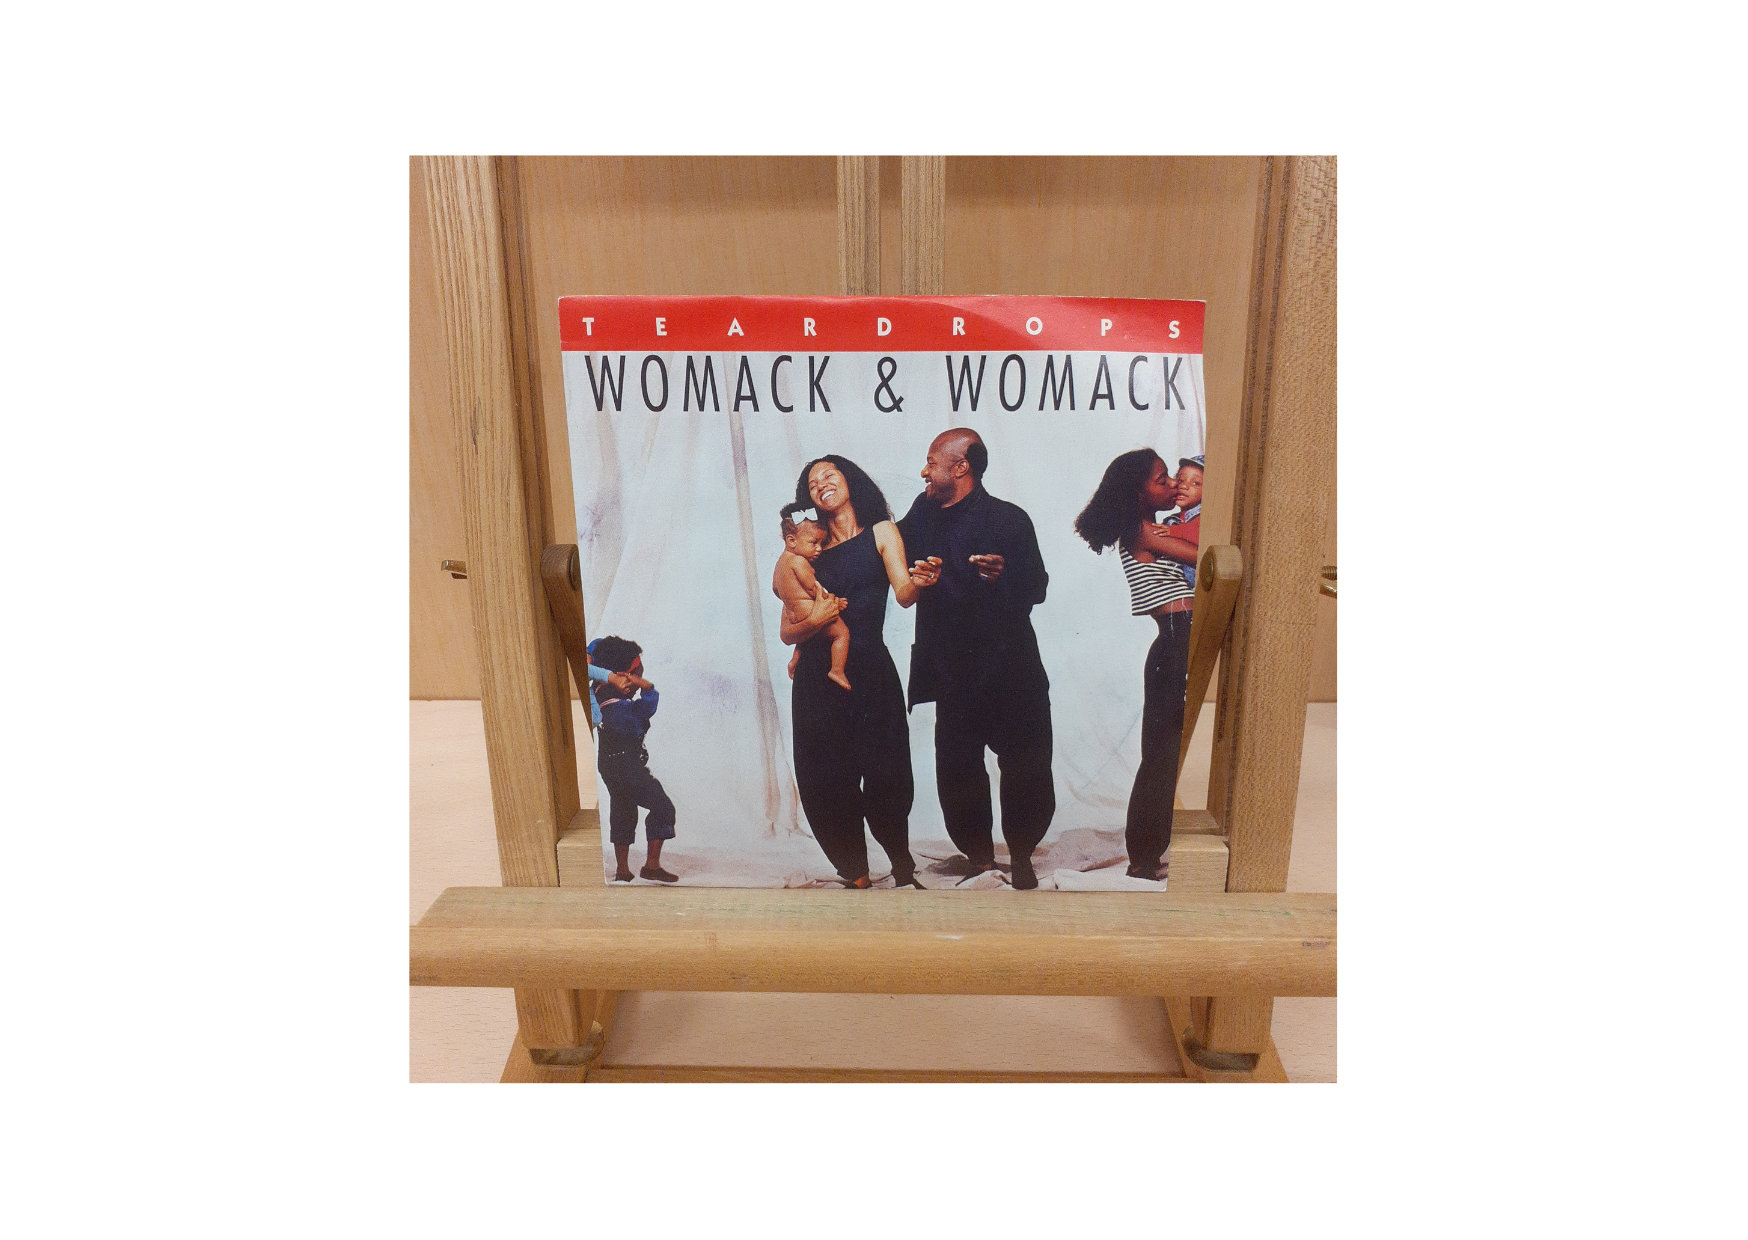 Womack & Womack Teardrops Front View 7" Single